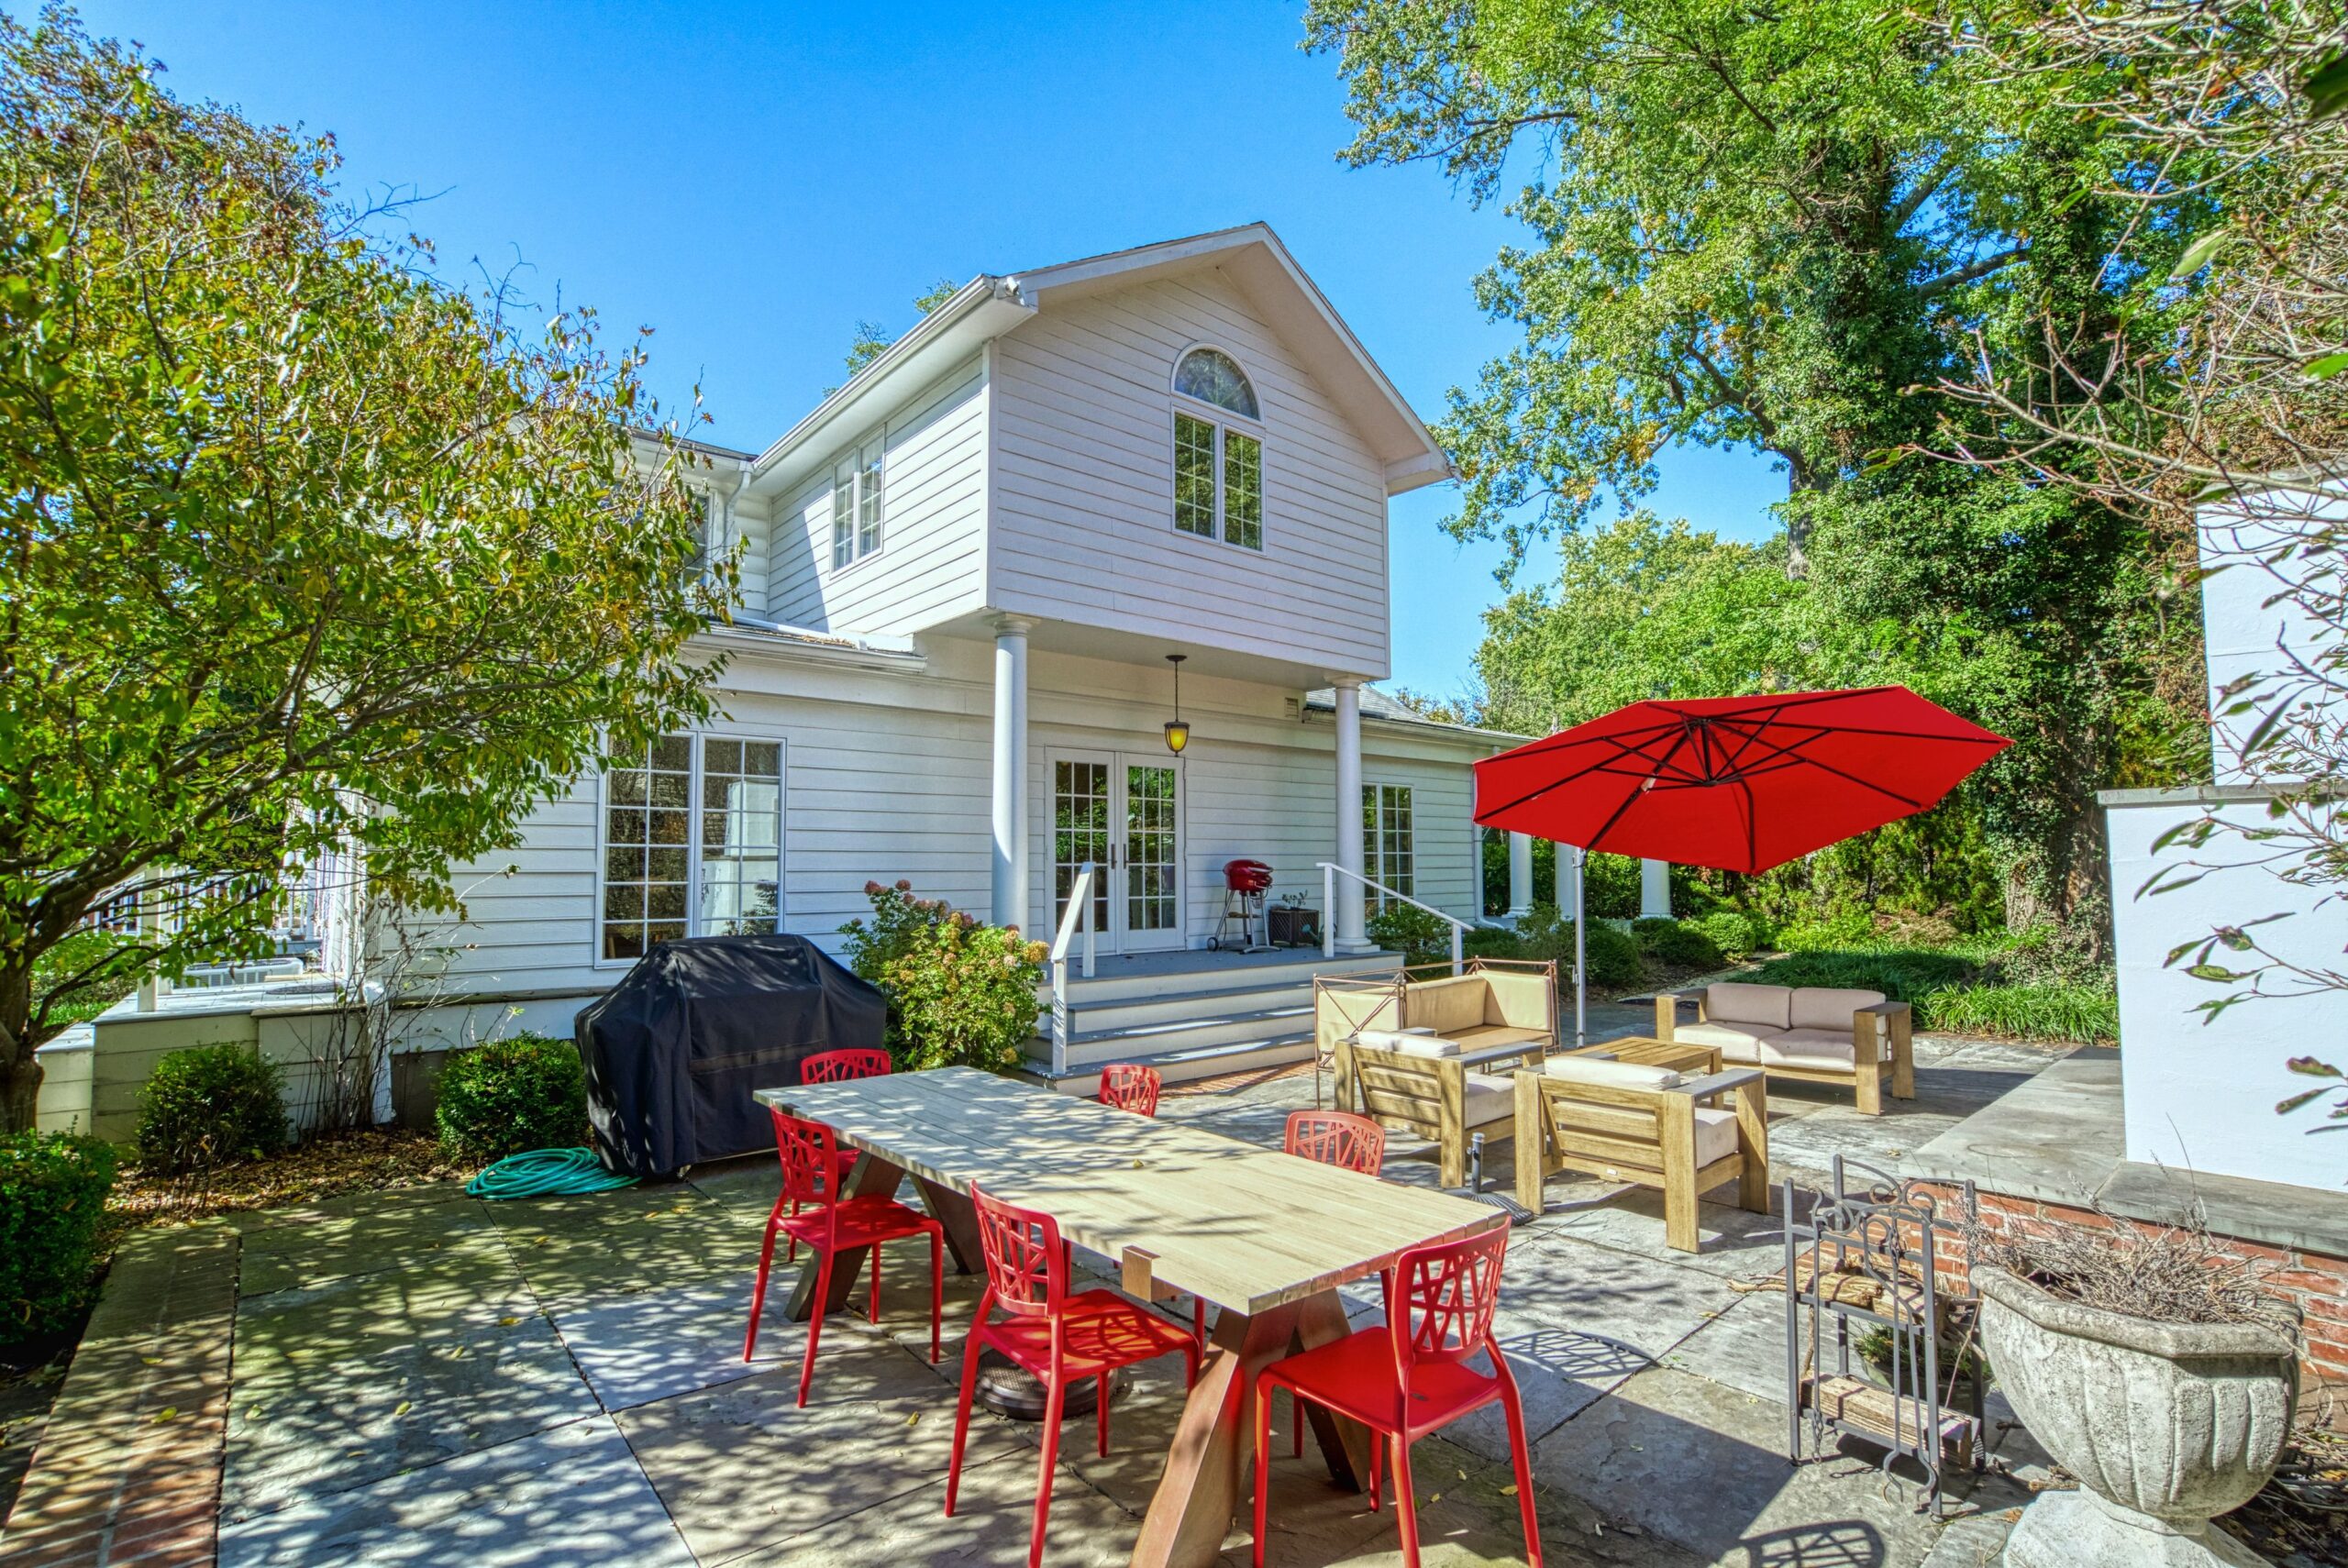 Exterior professional photo of 1826 Varnum St NW - showing the rear flagstone patio with patio furniture and red umbrella 